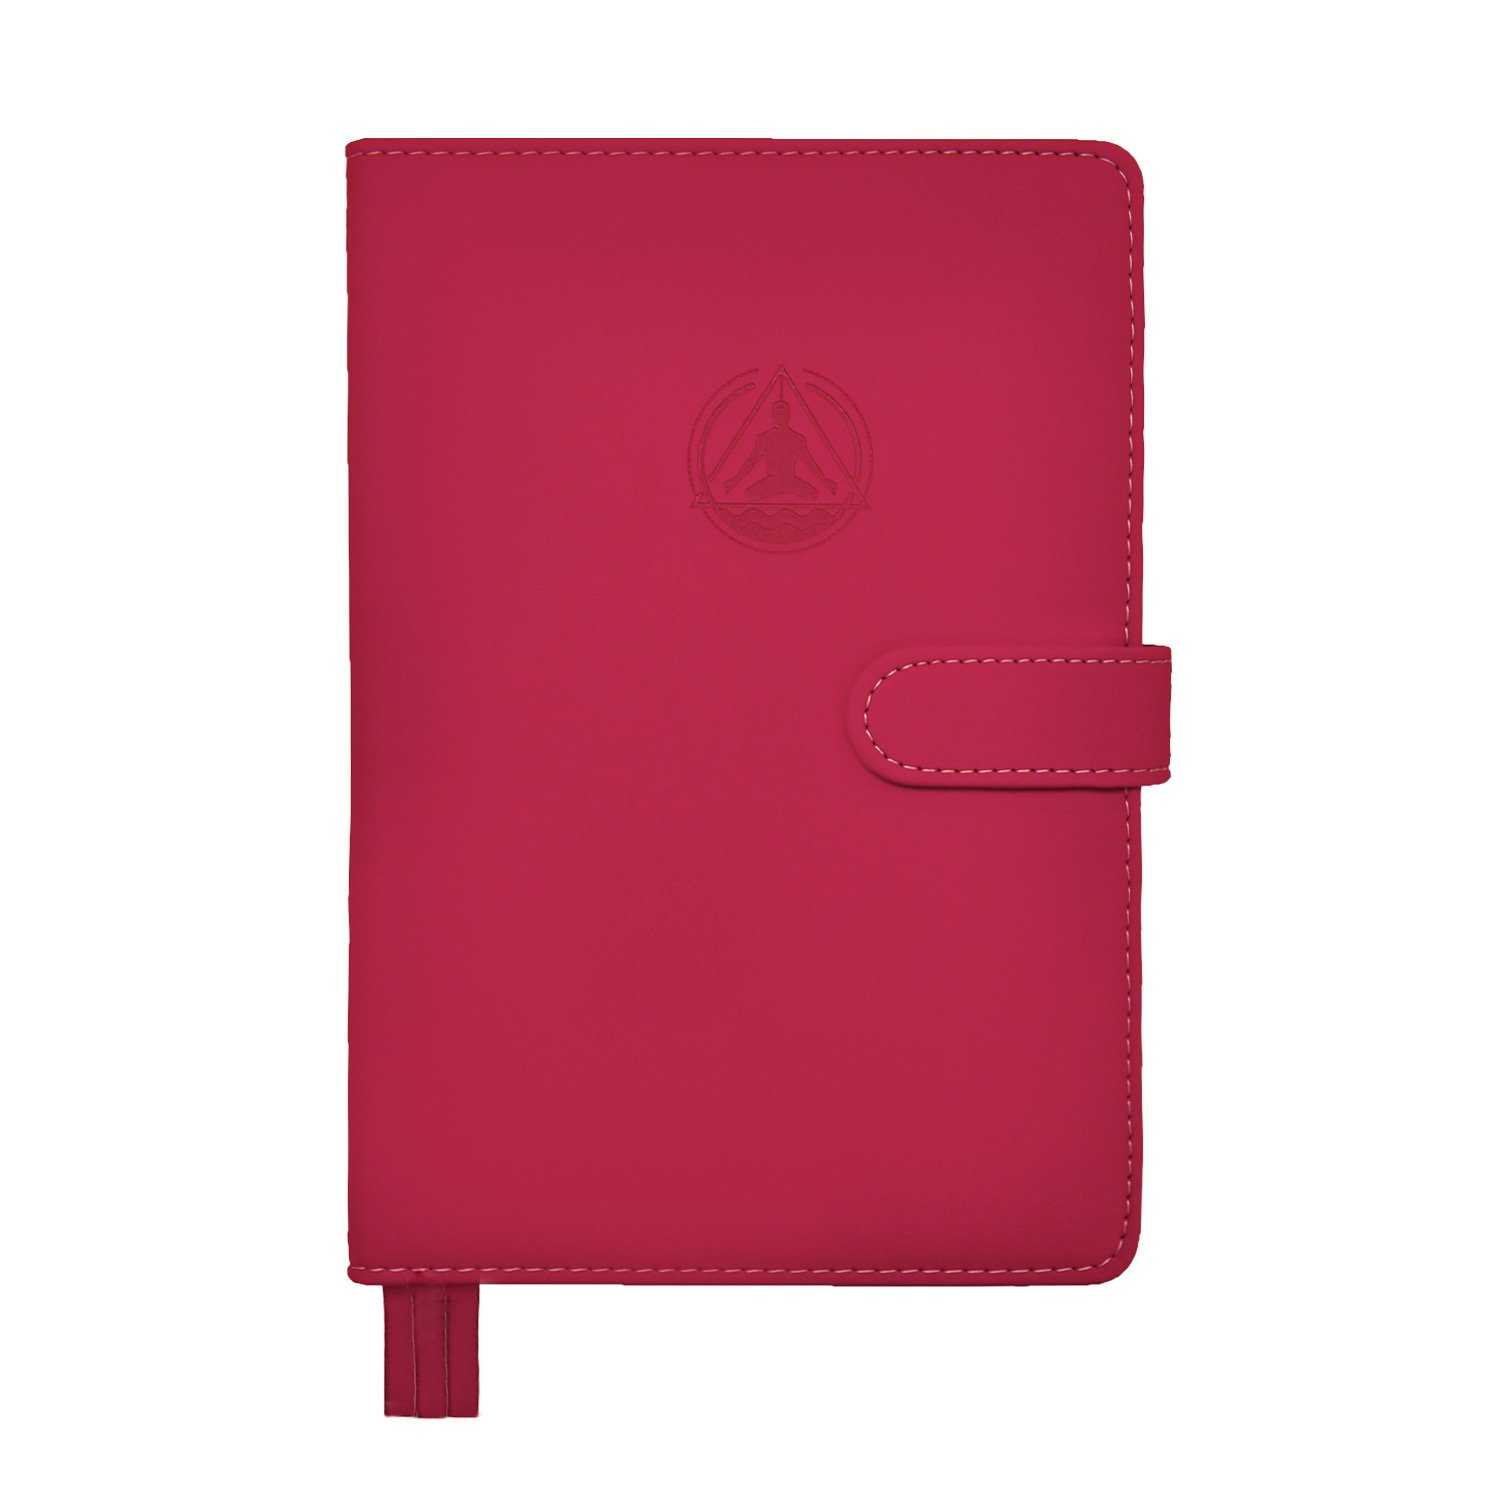 PU Leather Perfect A5 Notebook With Elastic Strap, Number Of Pages